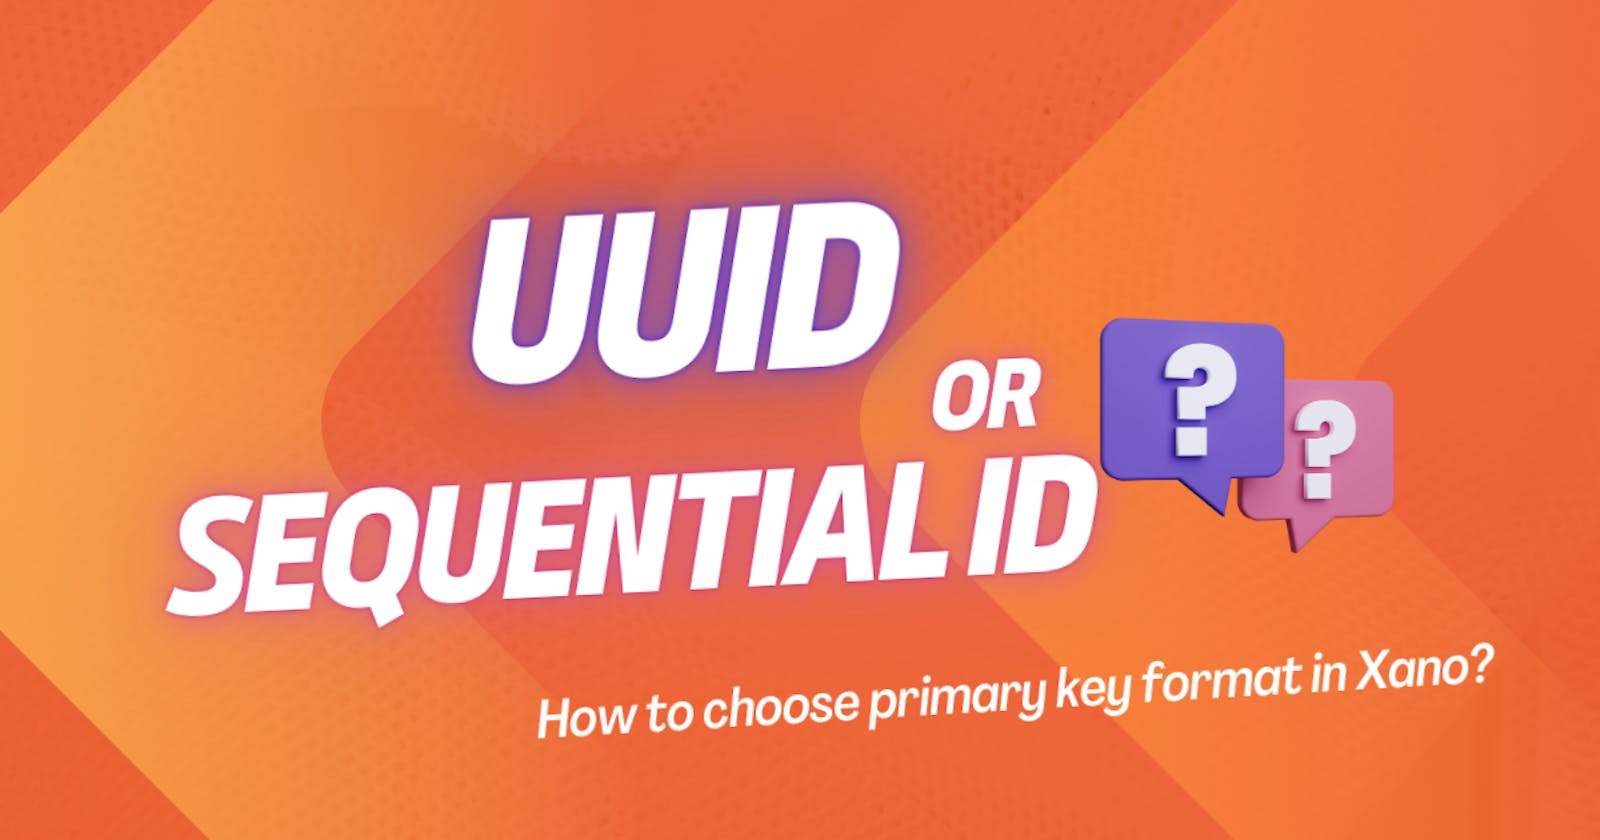 How to choose between the UUID and the sequential ID as the Primary key in Xano?